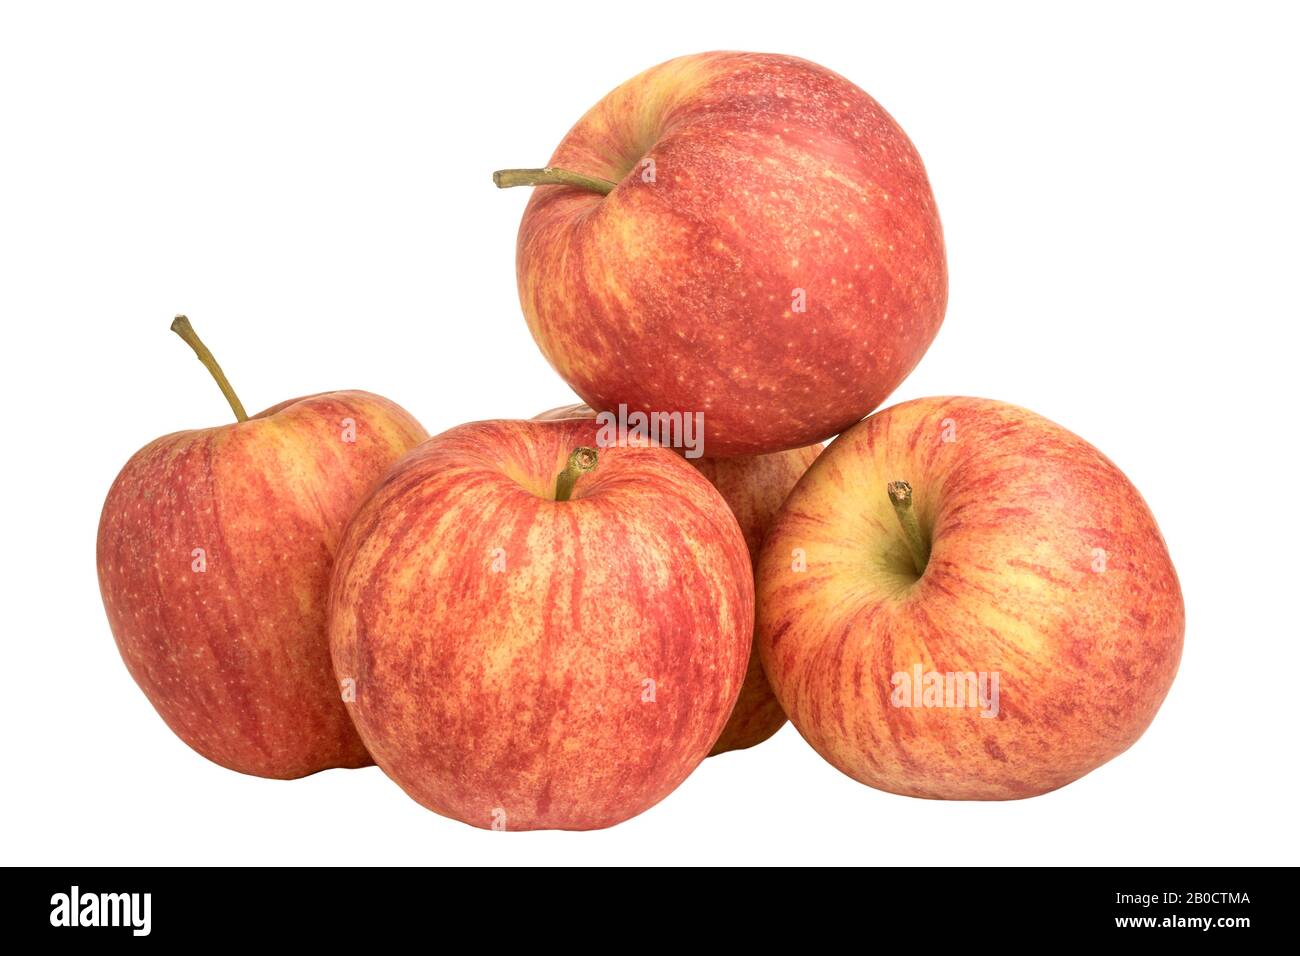 image still life of four apples with ponytails on a white background Stock Photo